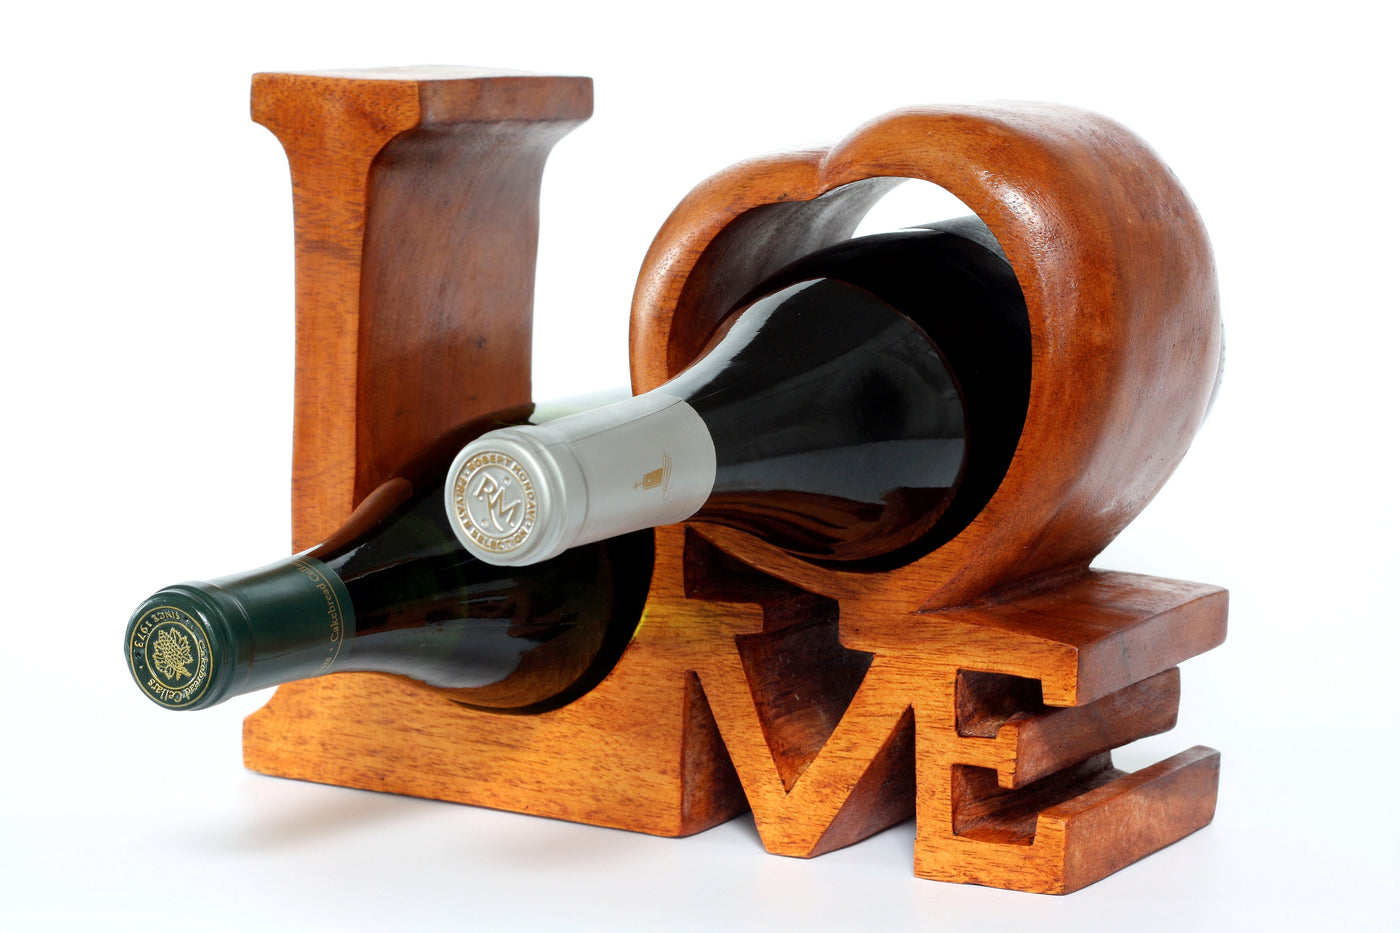 Wooden Handmade Wine Rack "Love" Bottle Holder Hand Carved Decorative Home Decor Accent Decoration Handcrafted Gift Free Standing